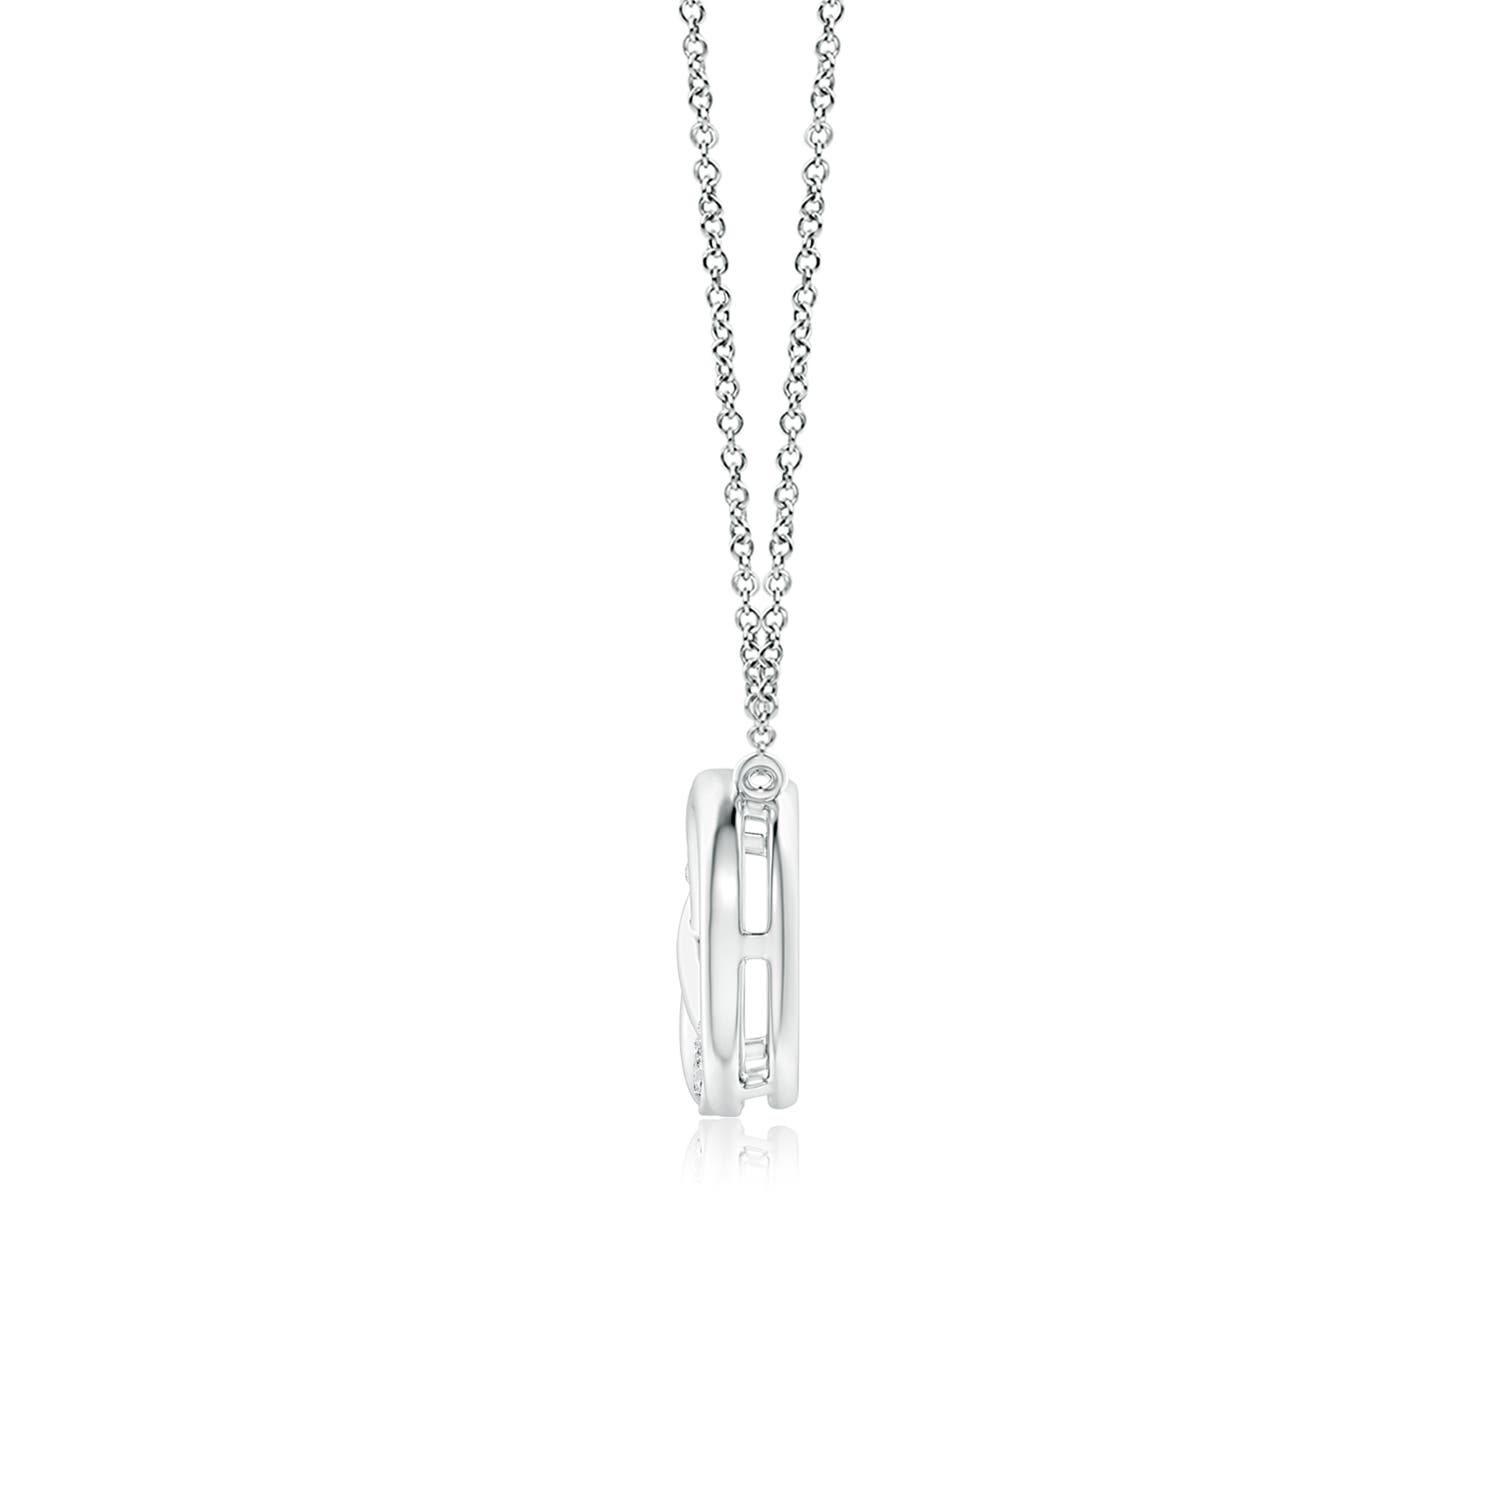 H, SI2 / 0.2 CT / 14 KT White Gold